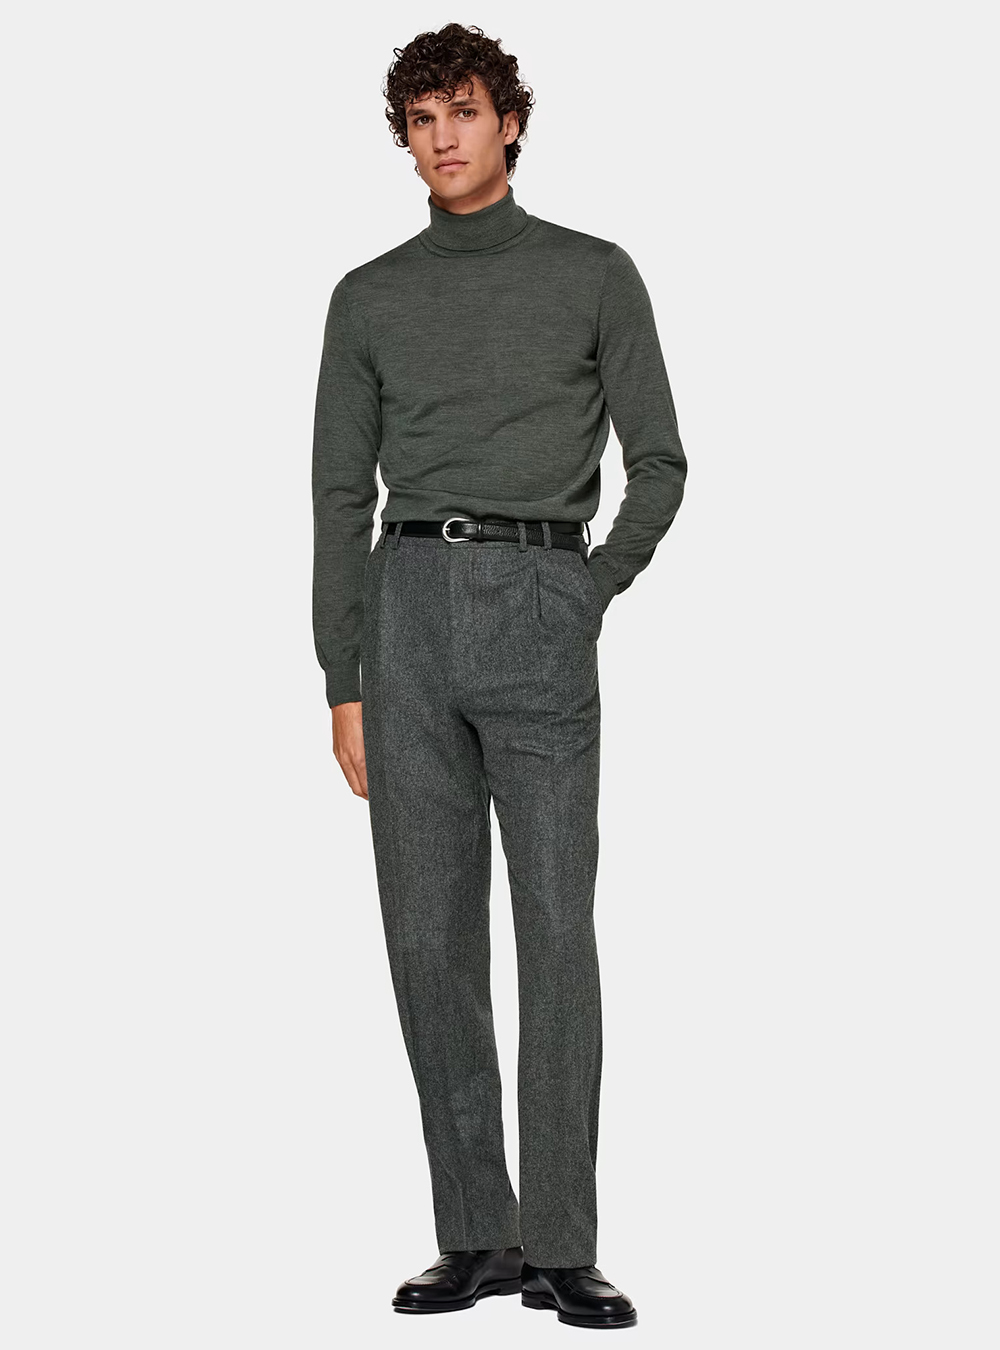 green turtleneck, charcoal dress pants, and black loafers